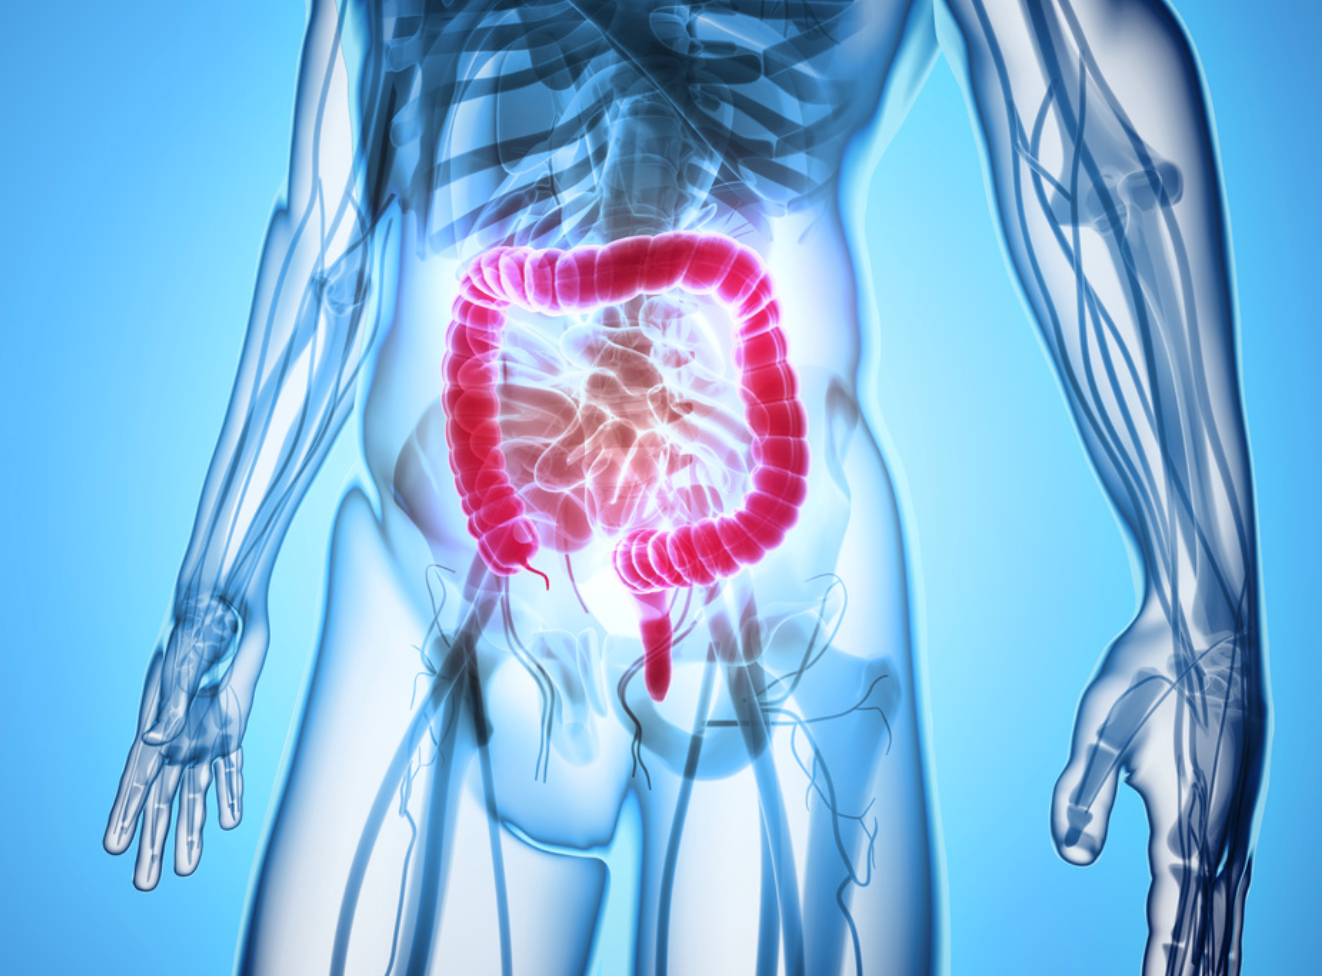 Study: Frequent Use of Antibiotics Shows Link to IBD